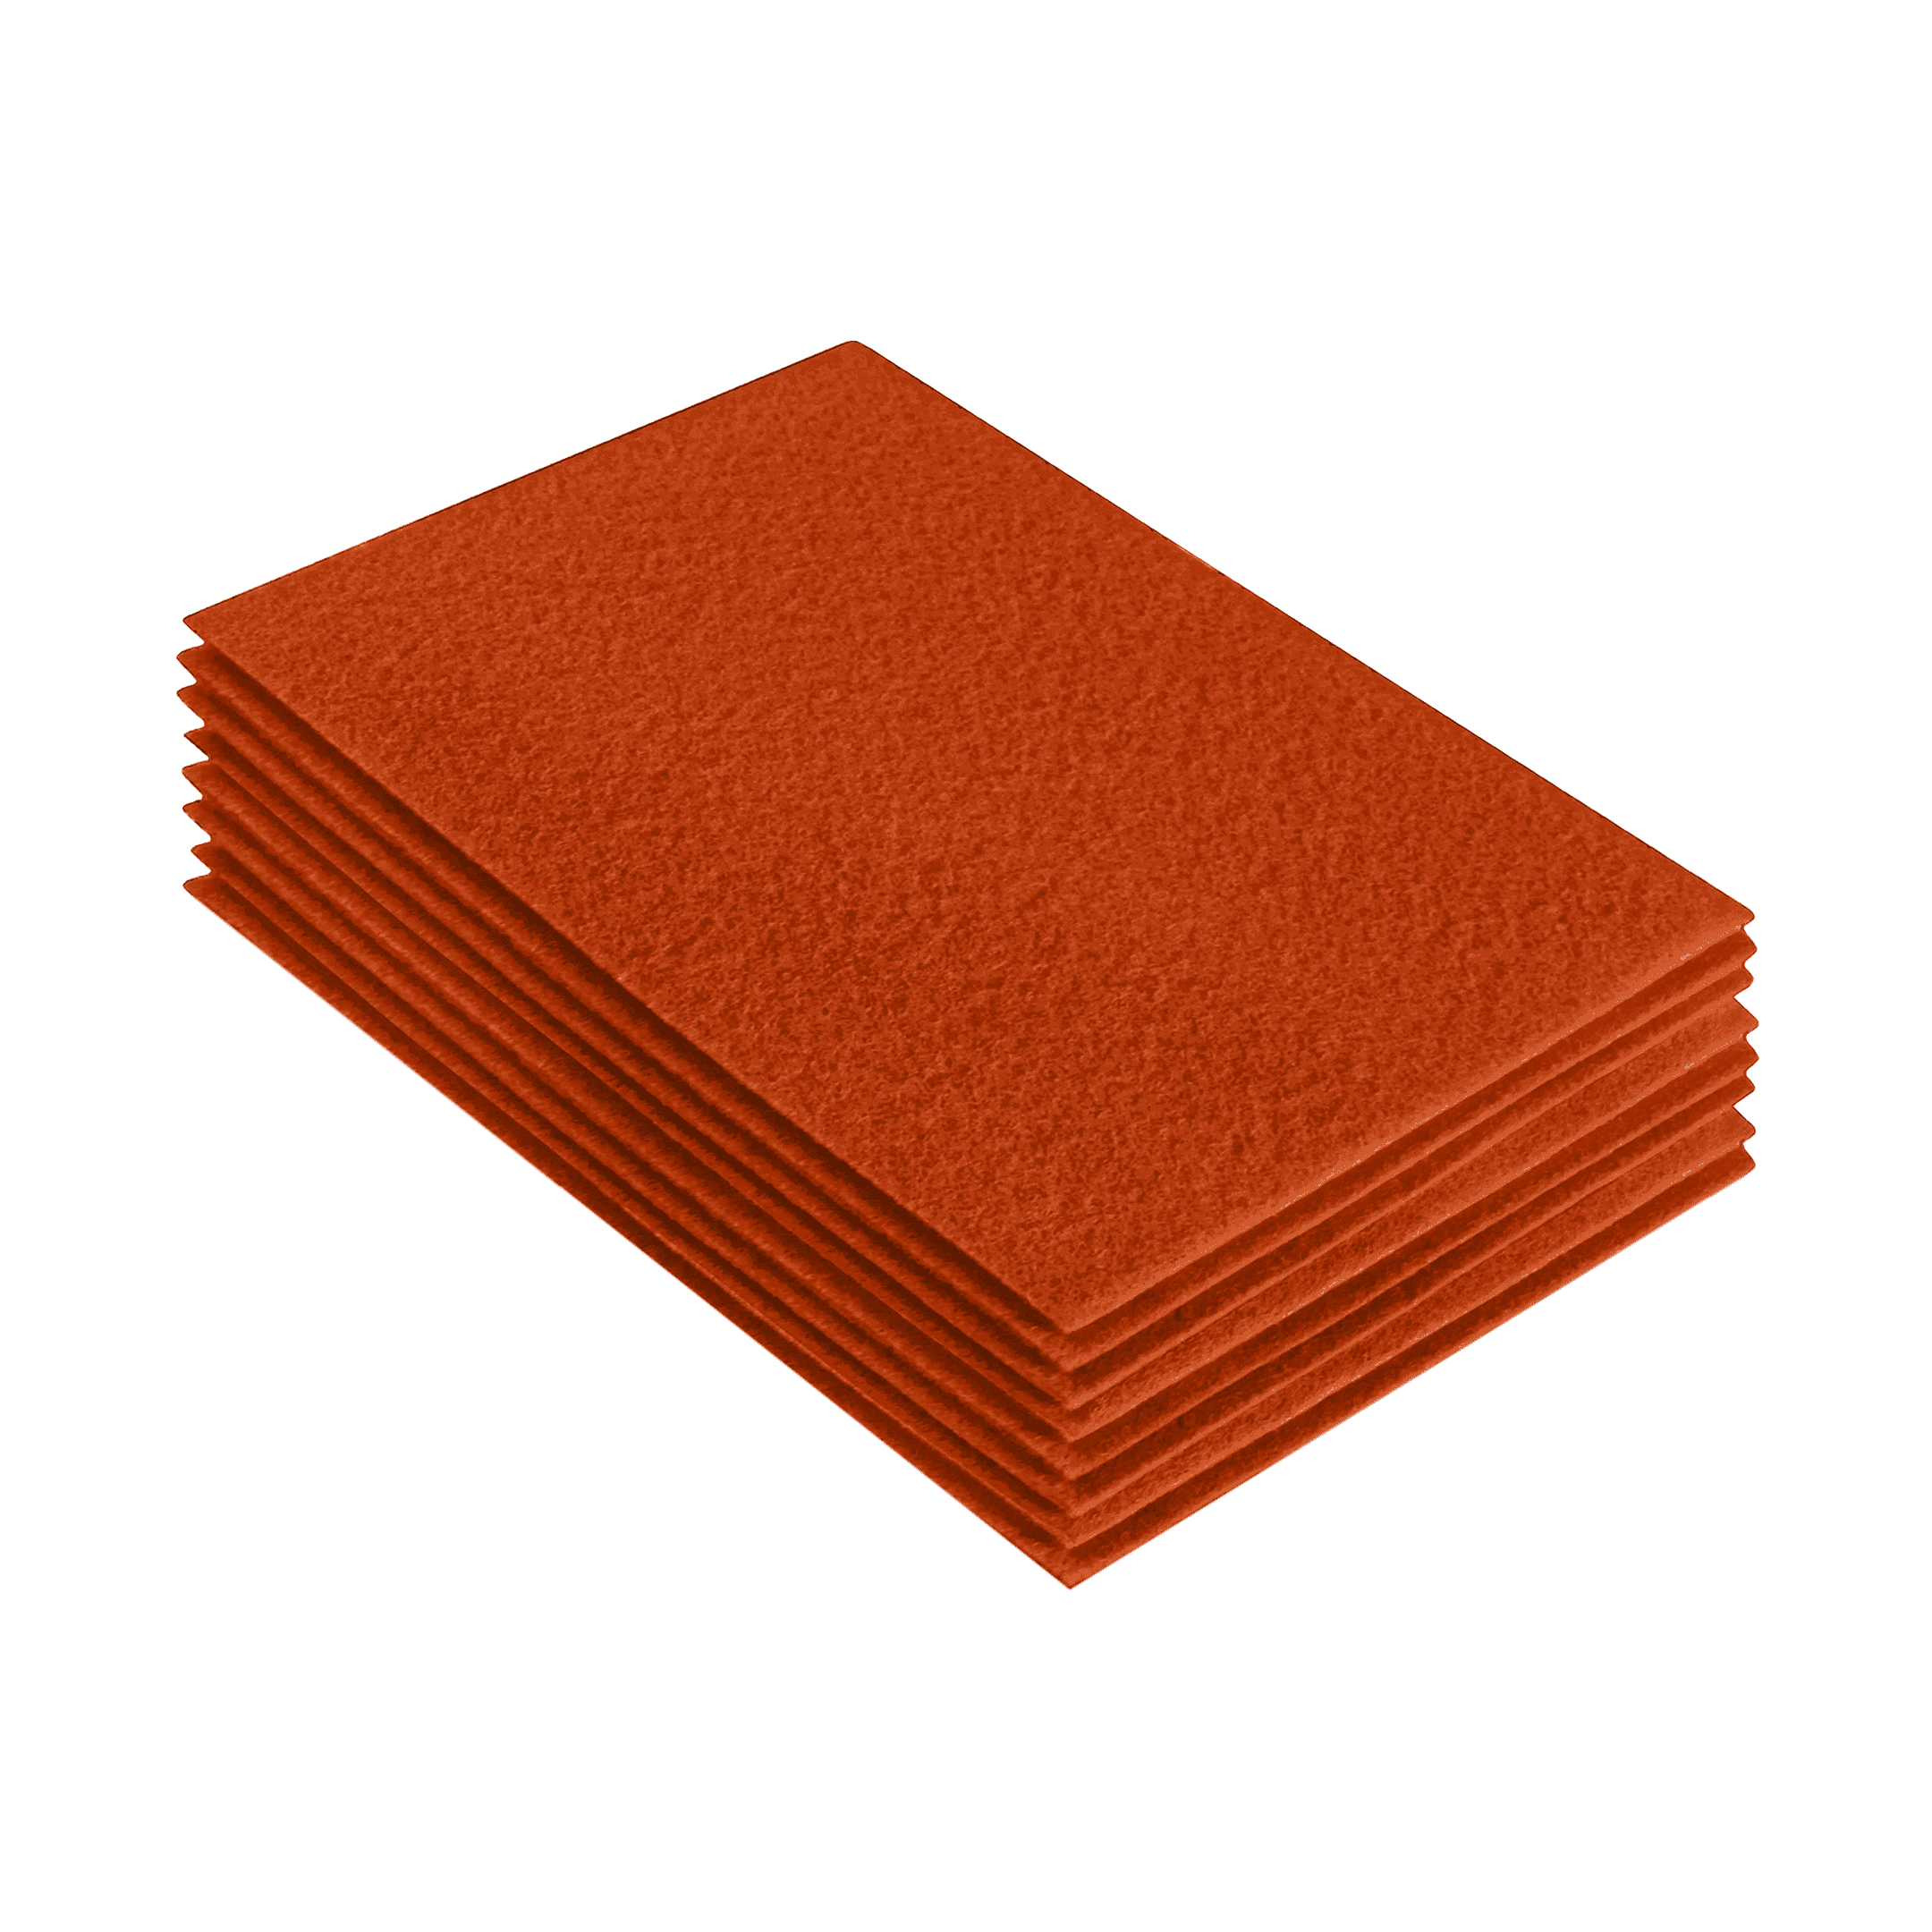 Self Adhesive Felt Sheets, 12 Pieces Sticky Felt, 8x12 Soft Felt Sheets  with Adhesive Backing for Sewing DIY Crafts (Orange)